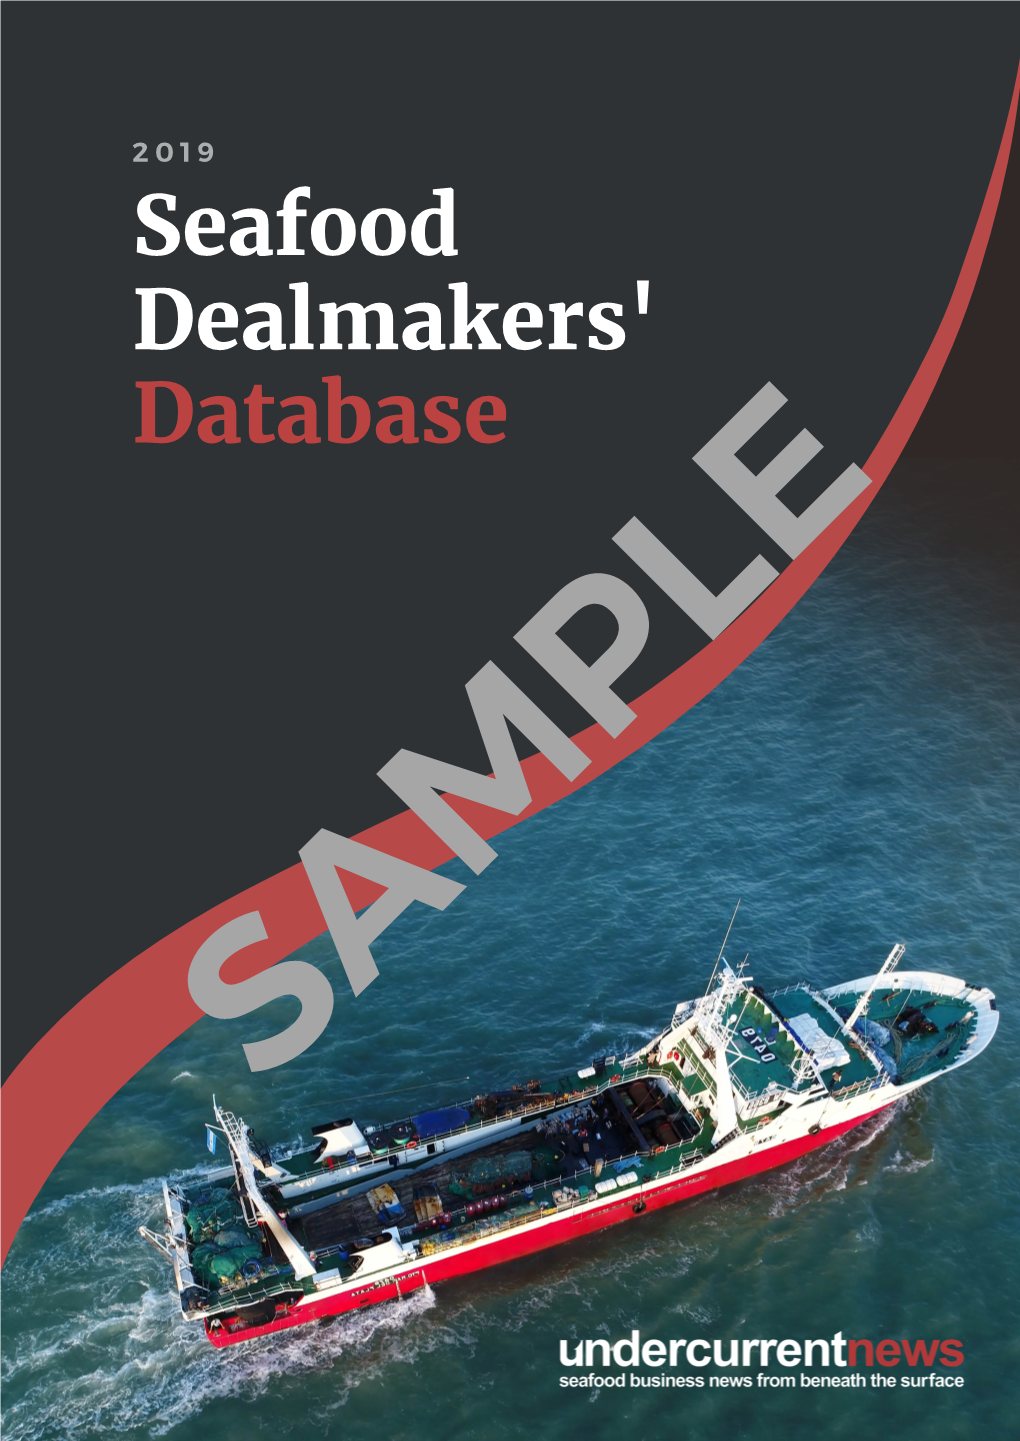 Seafood Dealmakers' Database